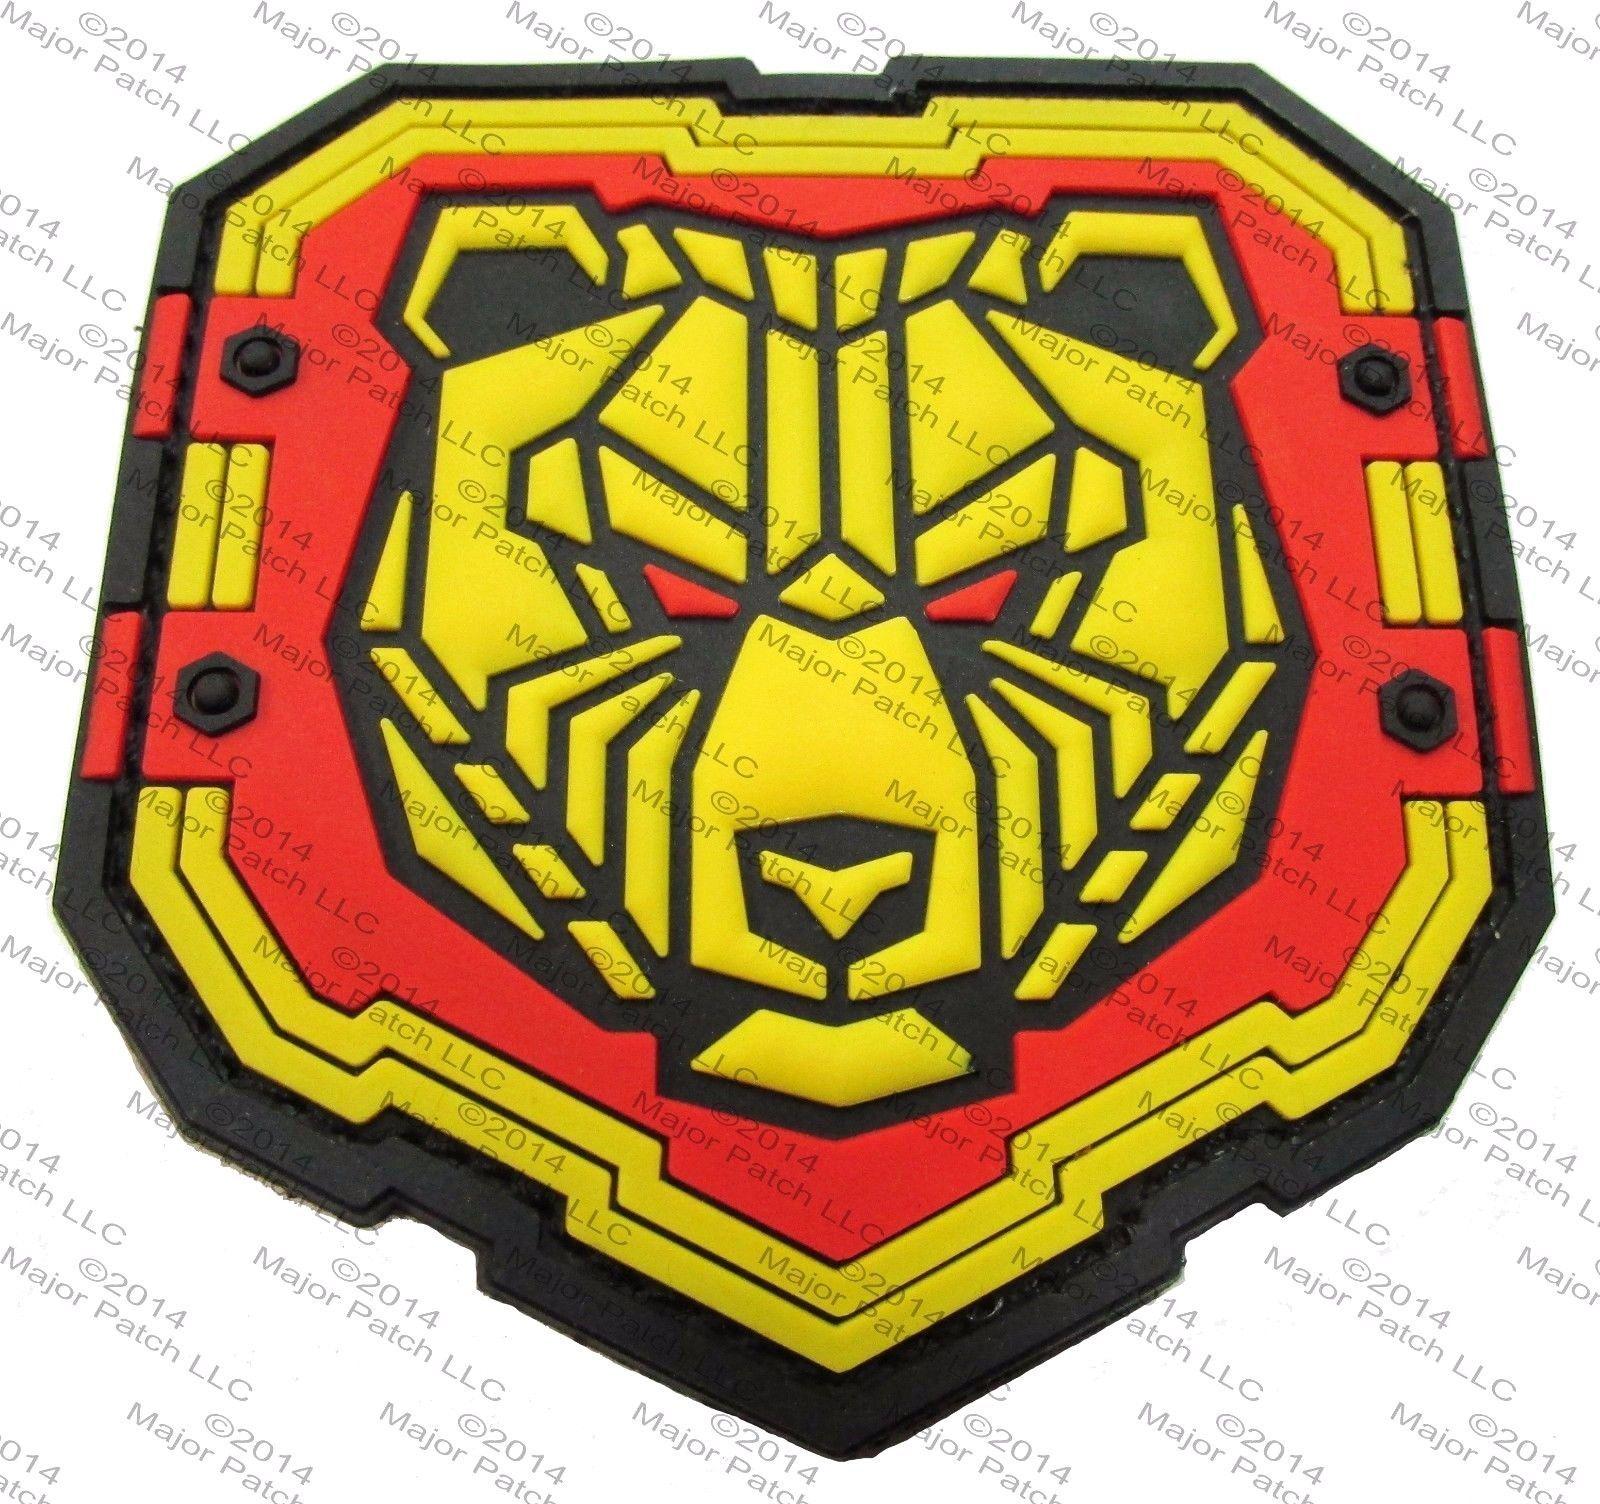 Red and Black Bear Face Logo - Industrial bear 3D pvc badge morale us military full color hook